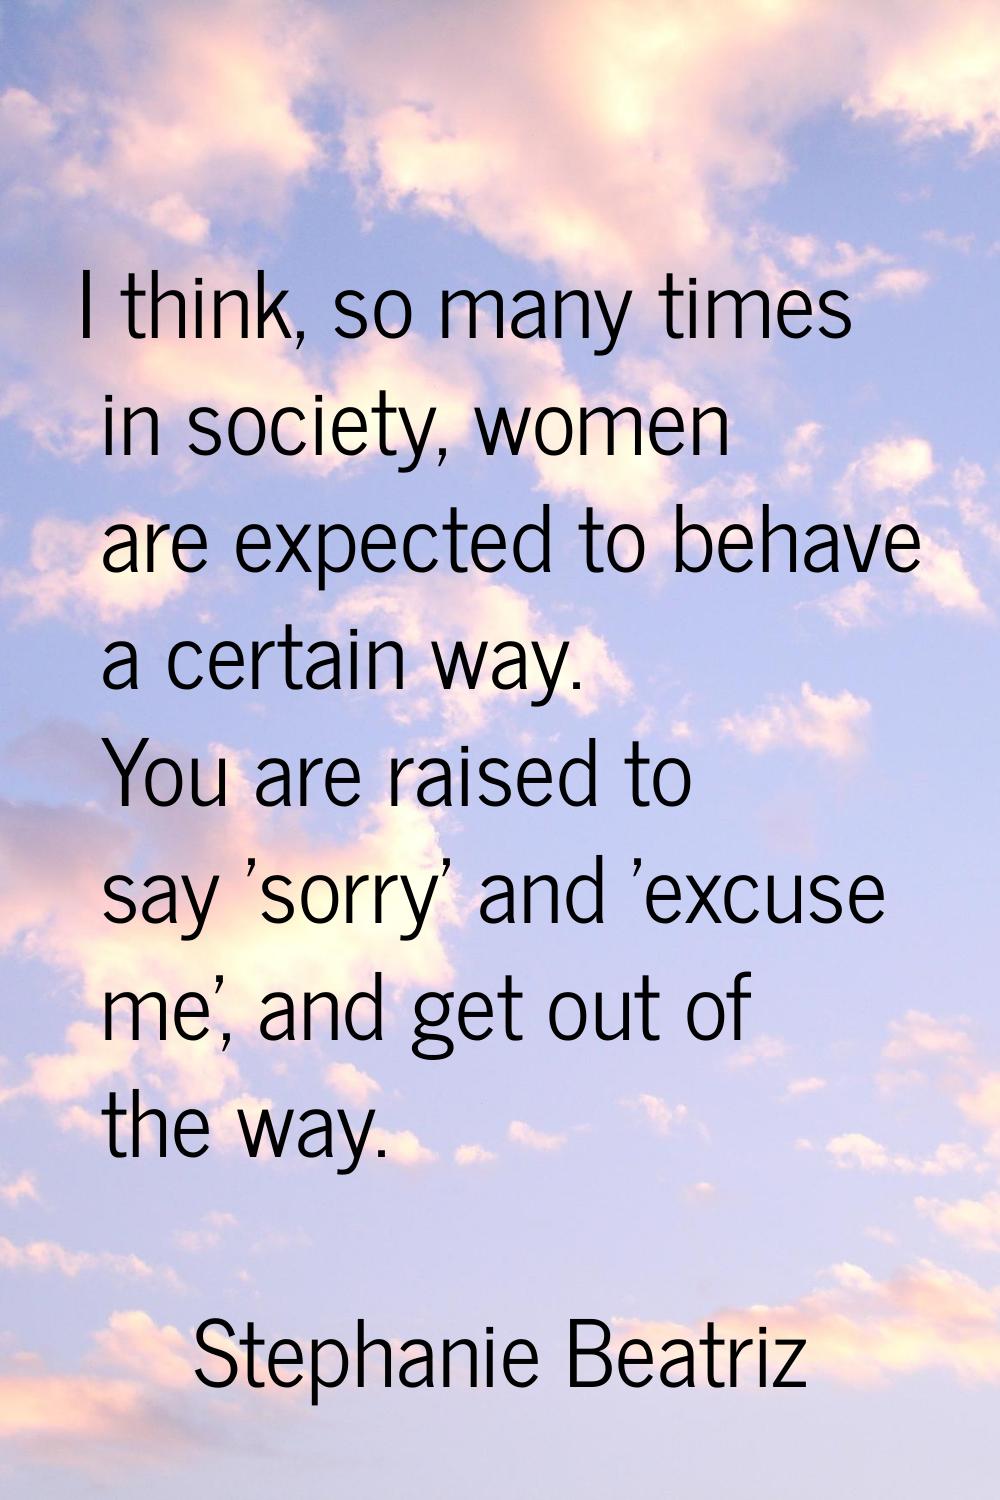 I think, so many times in society, women are expected to behave a certain way. You are raised to sa